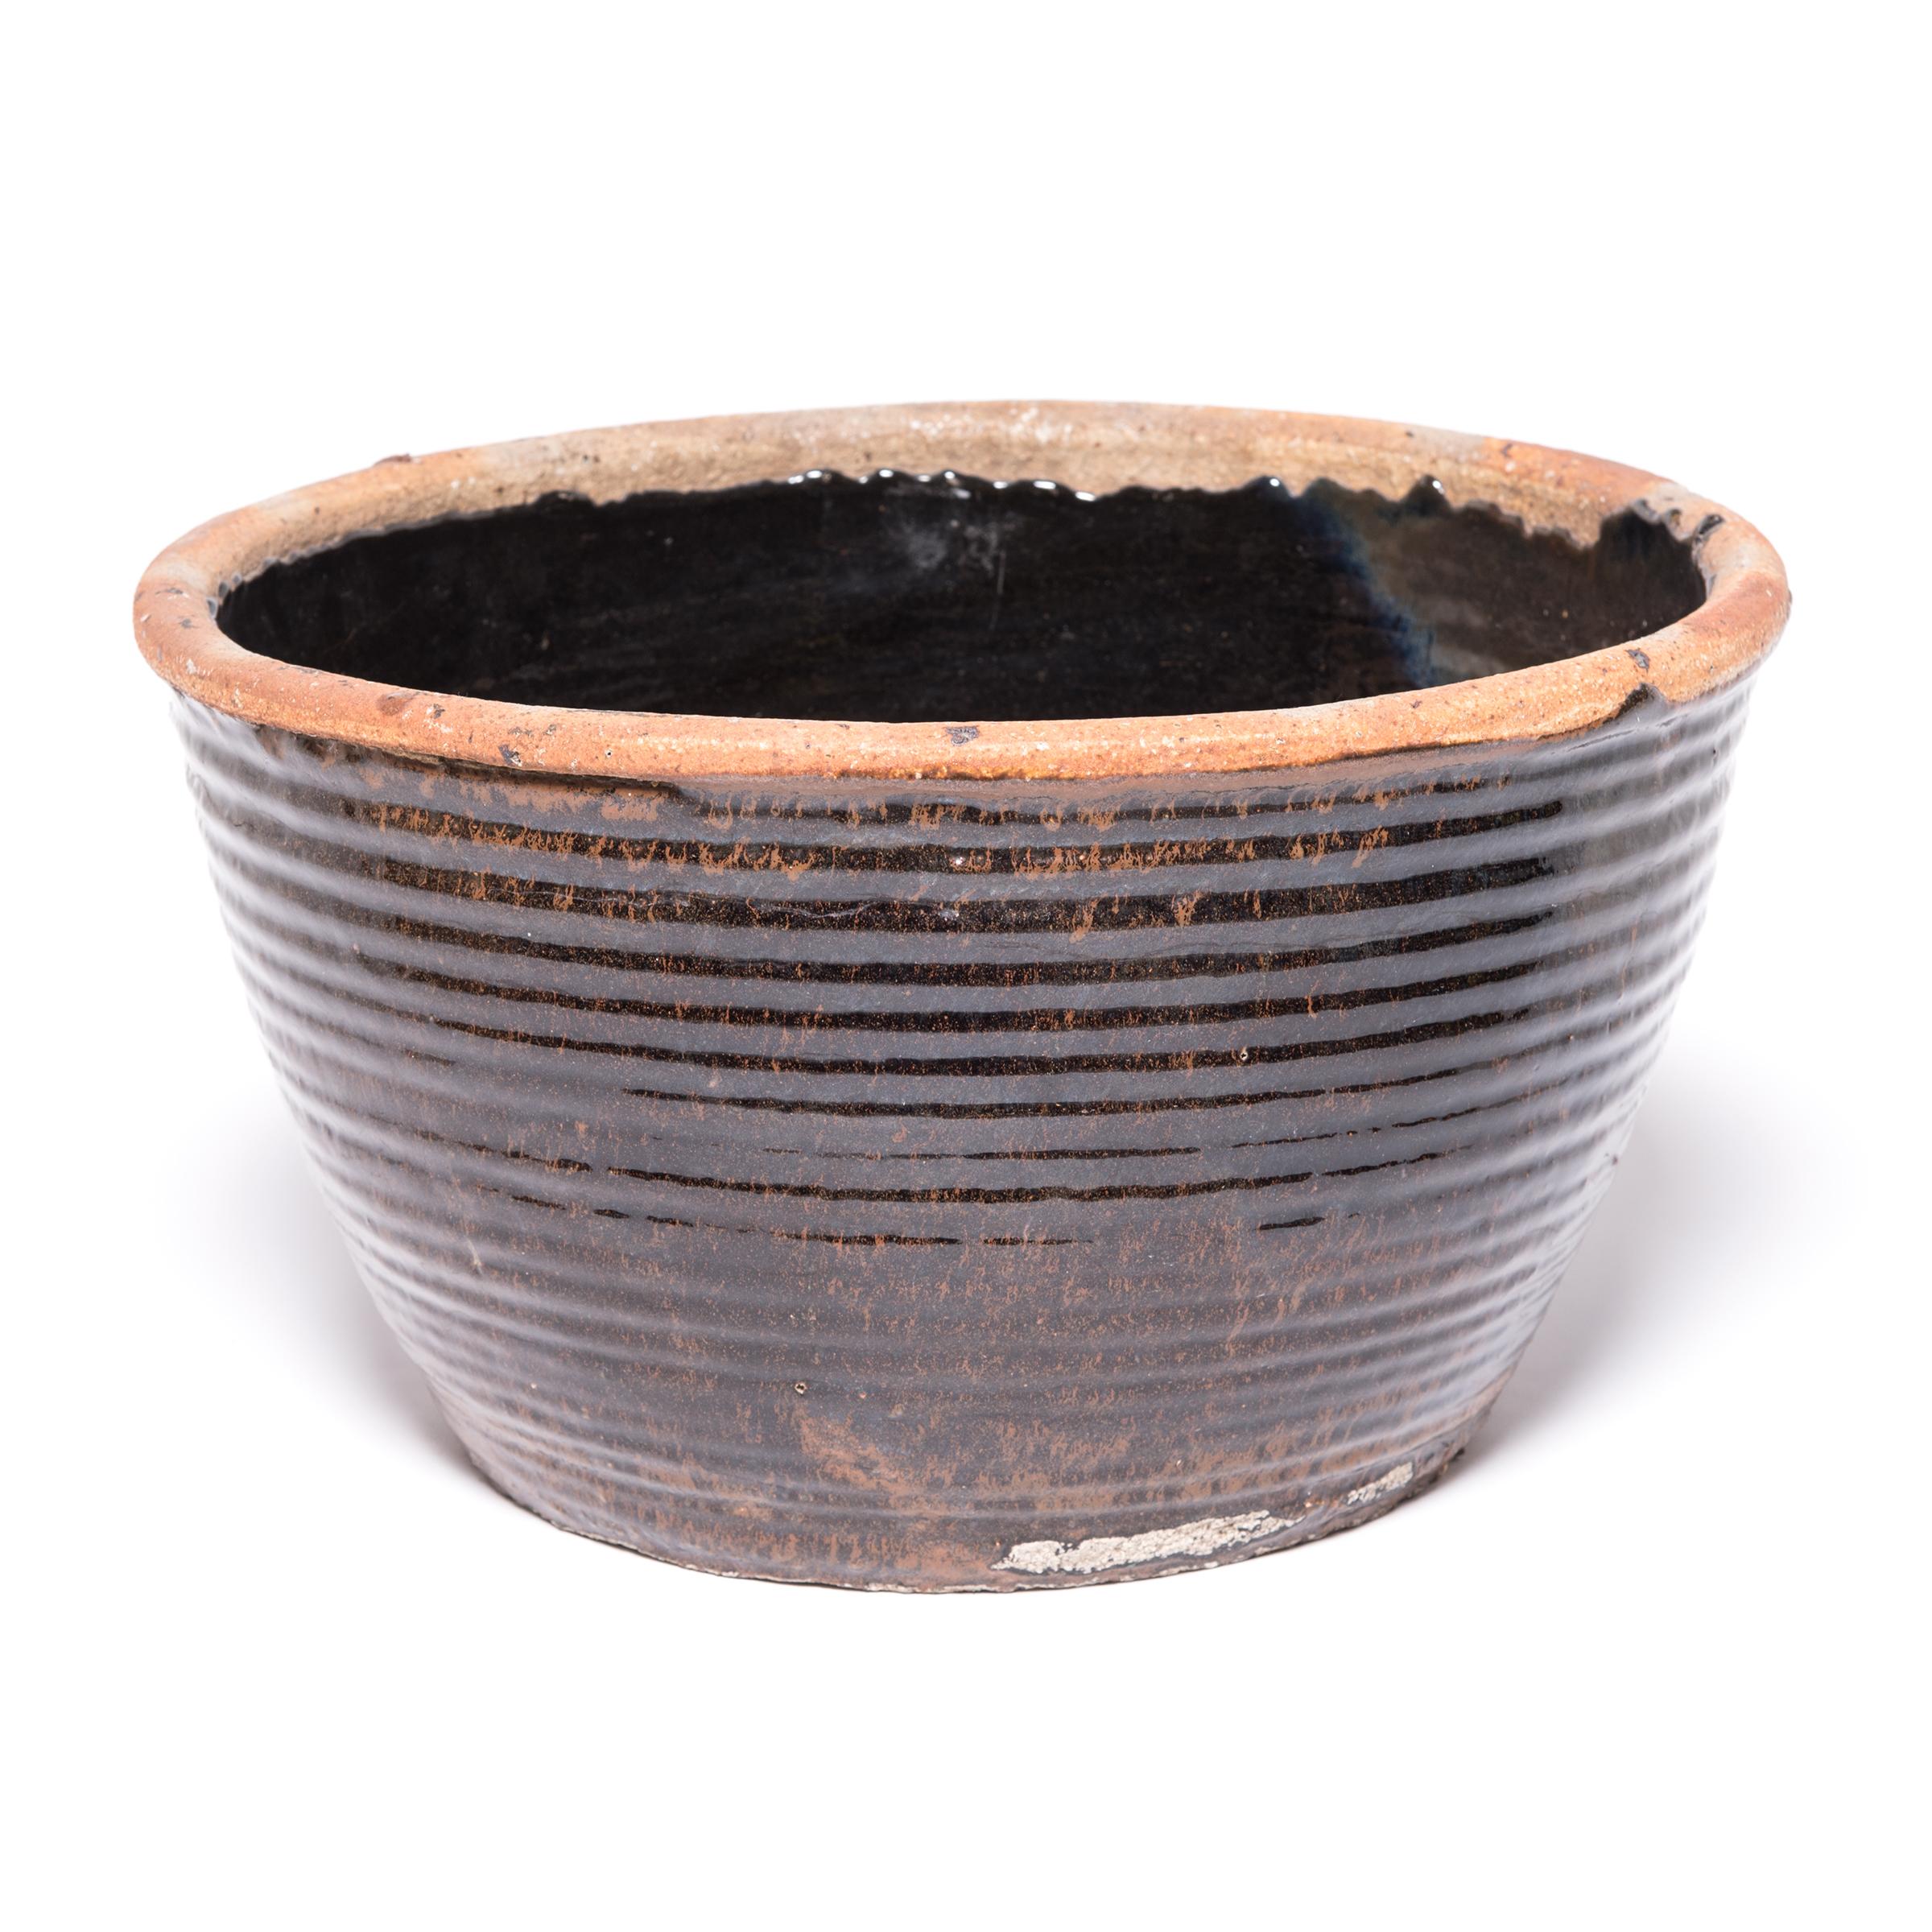 Originally used for pickling foods, this mid-20th century ceramic jar is coated inside and out with a dark glaze. Subtle ridges suggest that the bowl was fashioned by coiling flattened ropes of clay into the desired shape. Featuring an unglazed rim